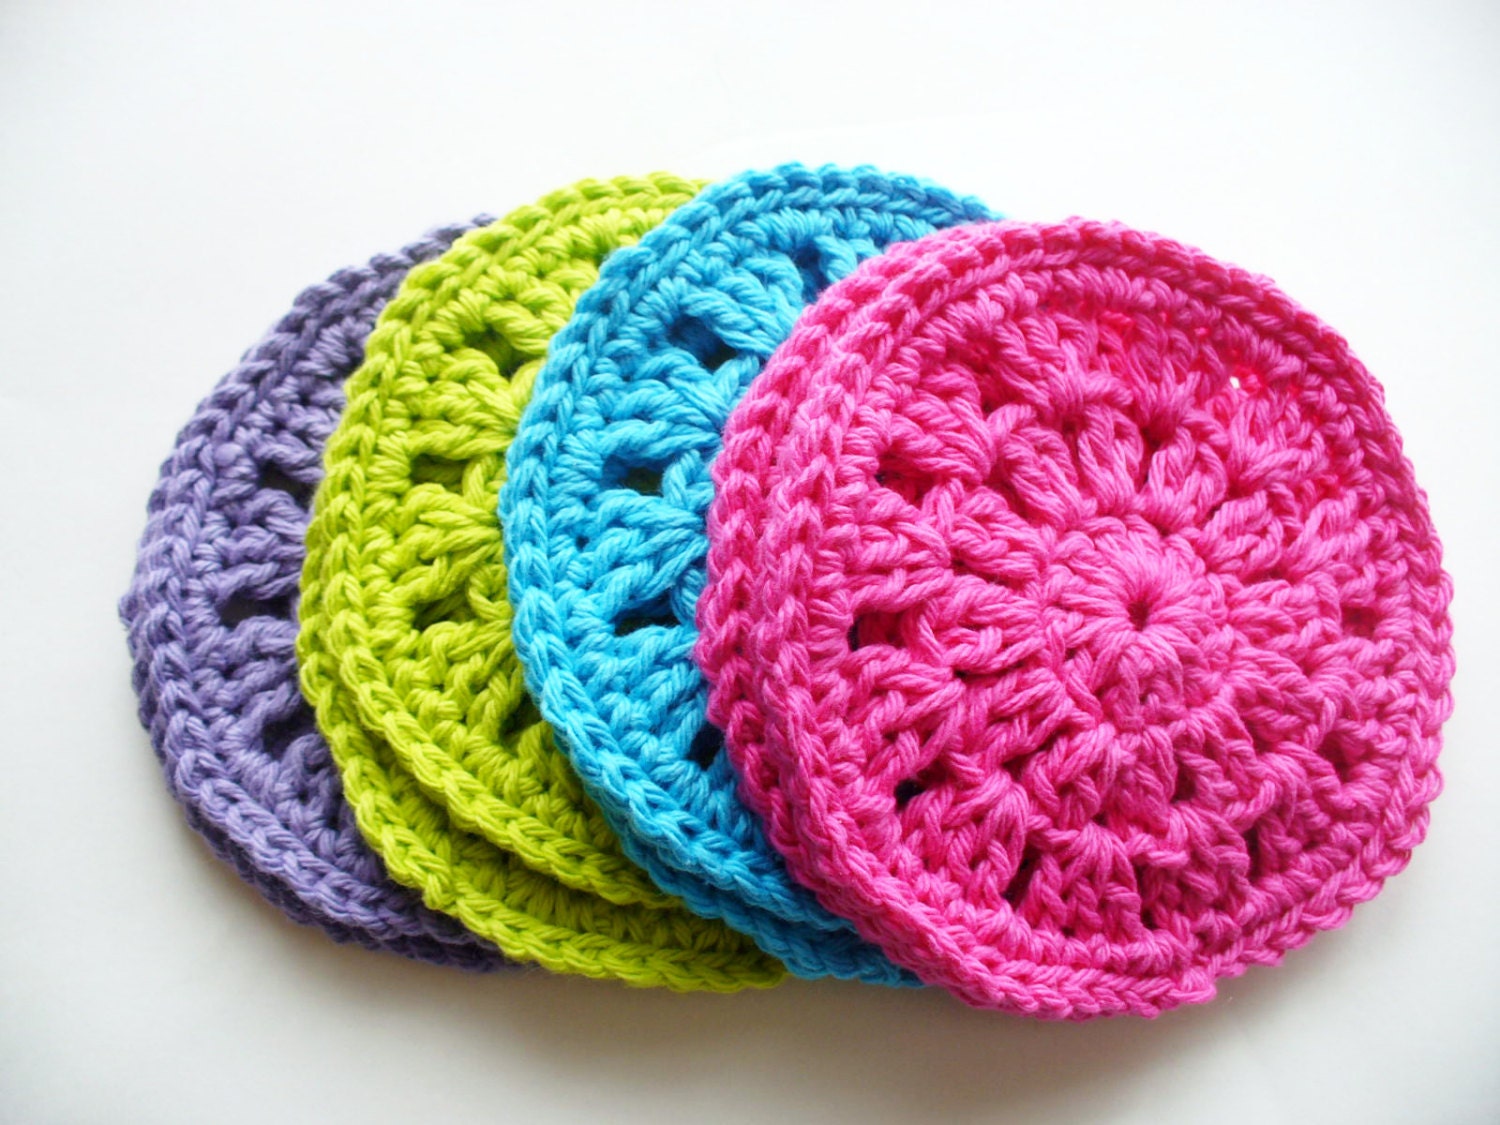 Set of 8 Bright Crocheted Coasters - ACCrochet